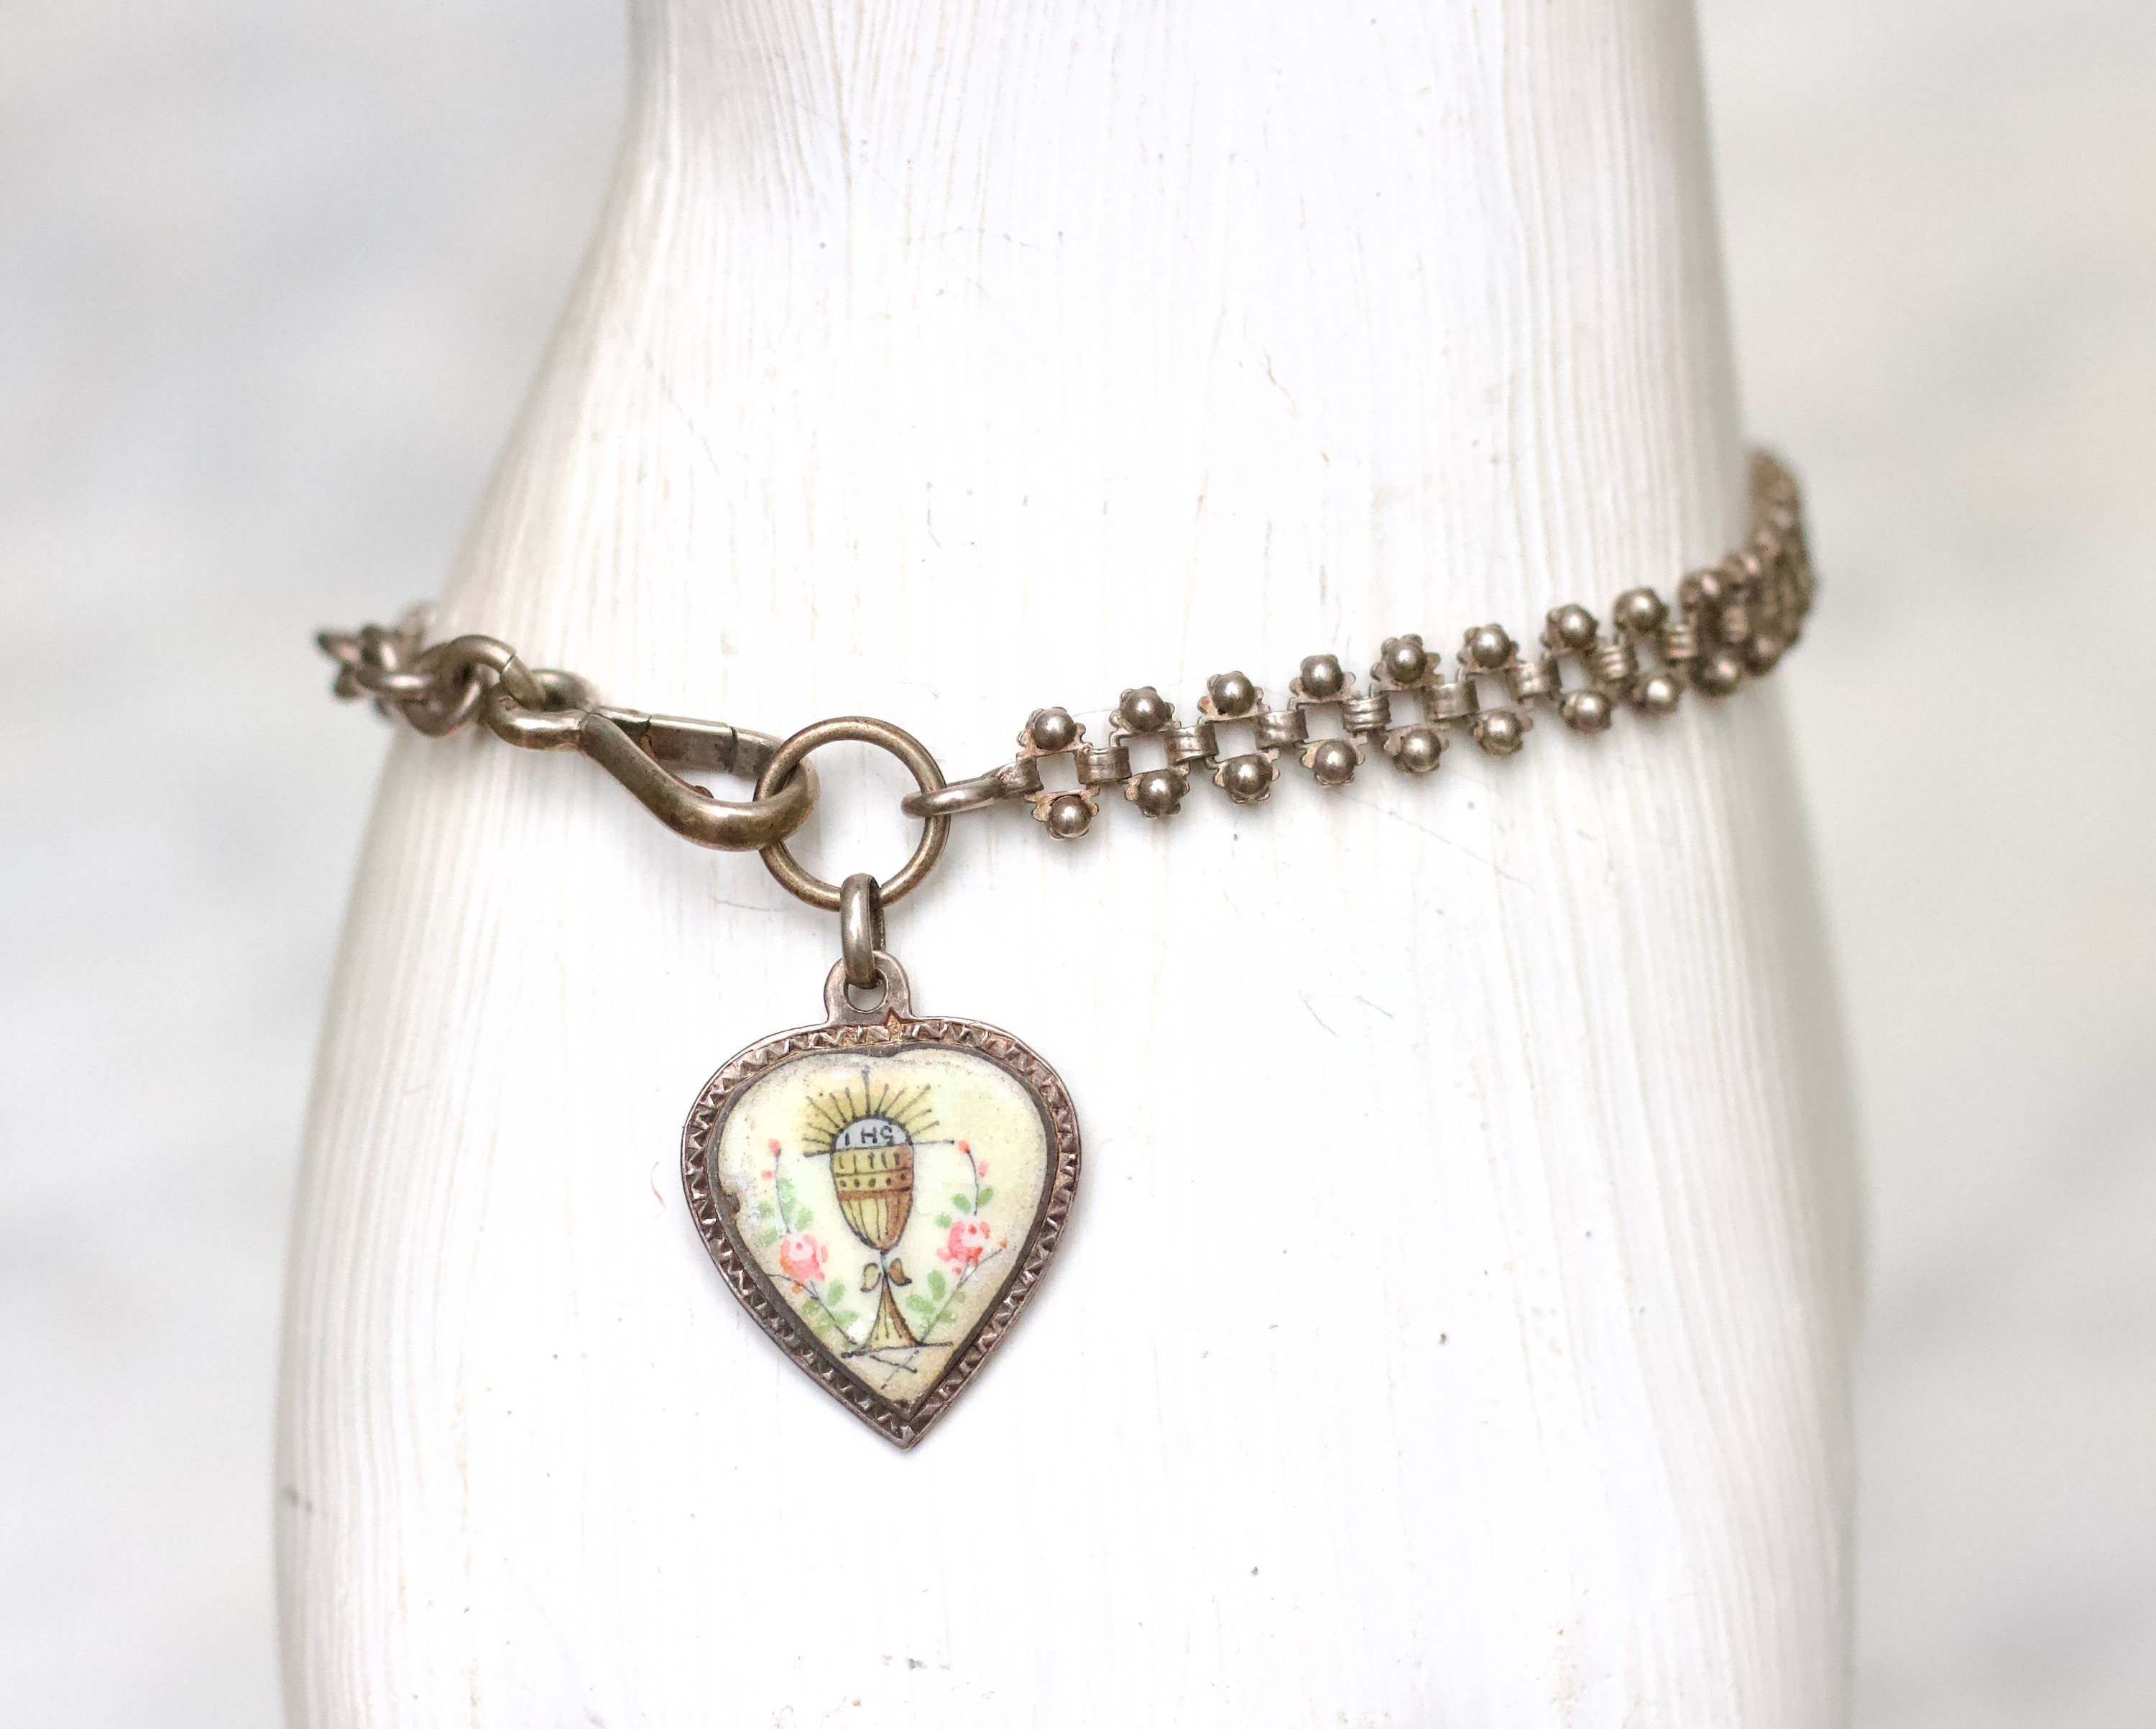 Vintage Sterling Silver Charm Bracelet with Sterling Charms